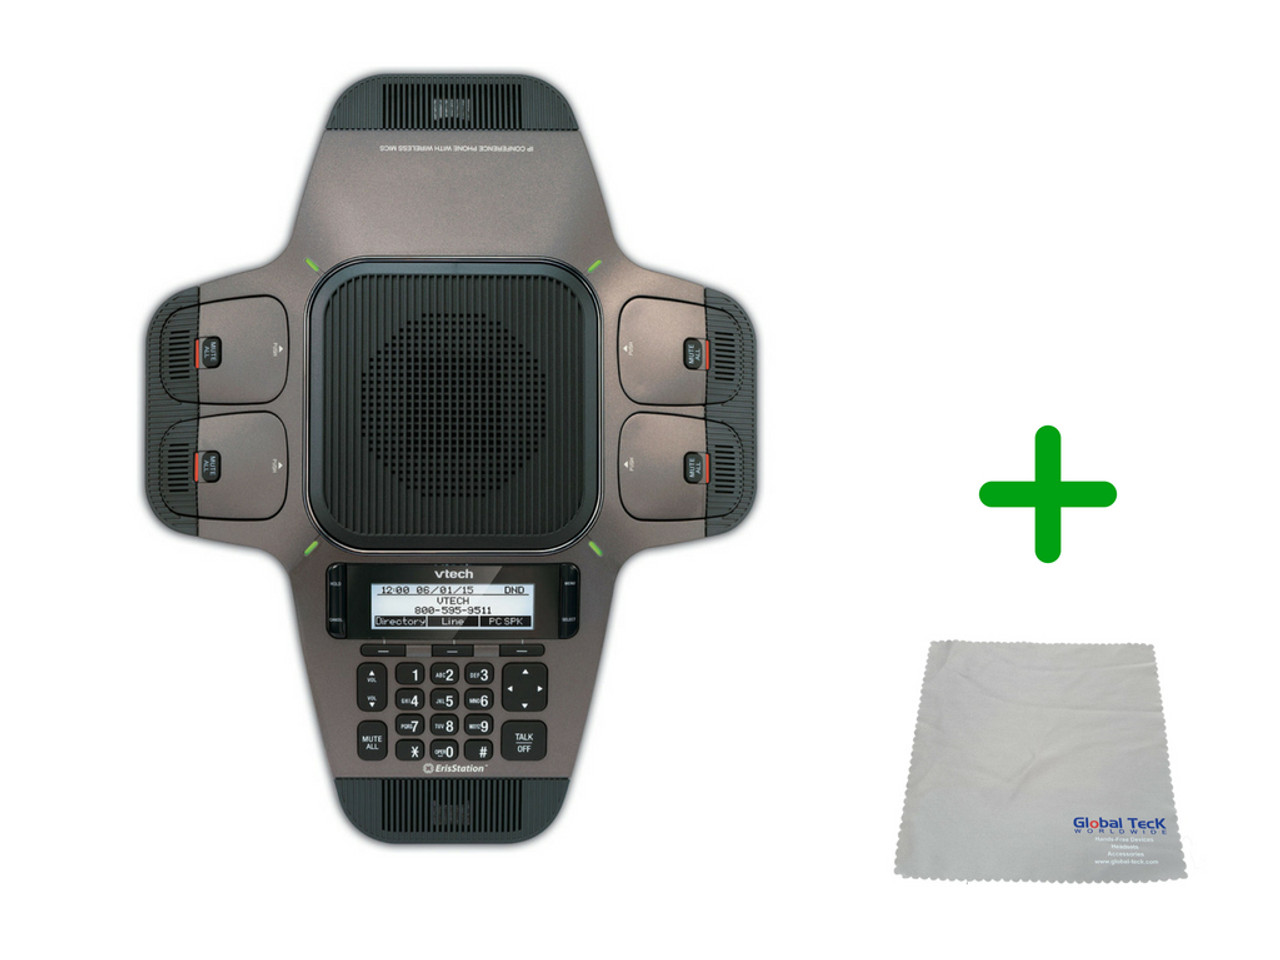 Conference Speakerphones for Office & Business